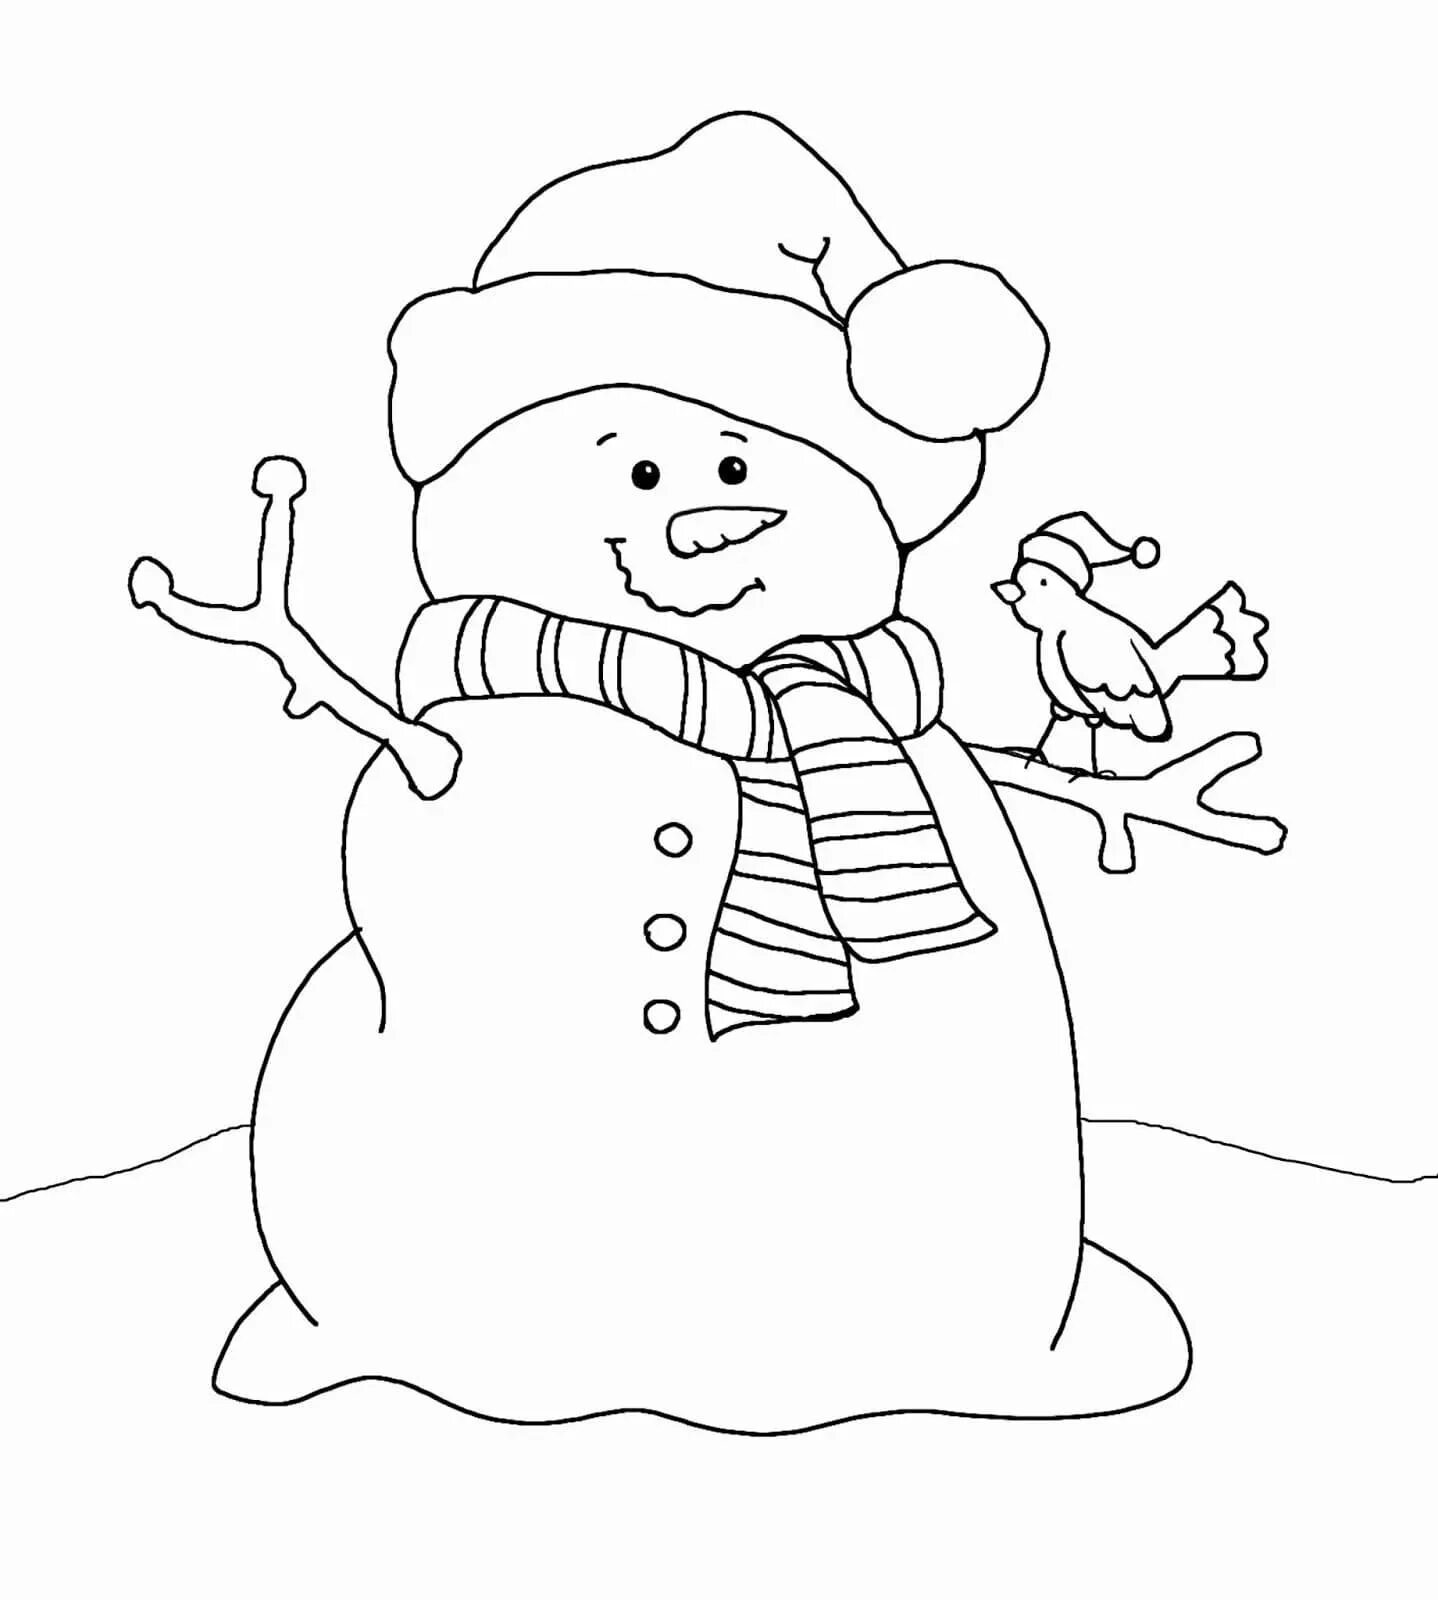 Sweet Christmas snowman coloring page